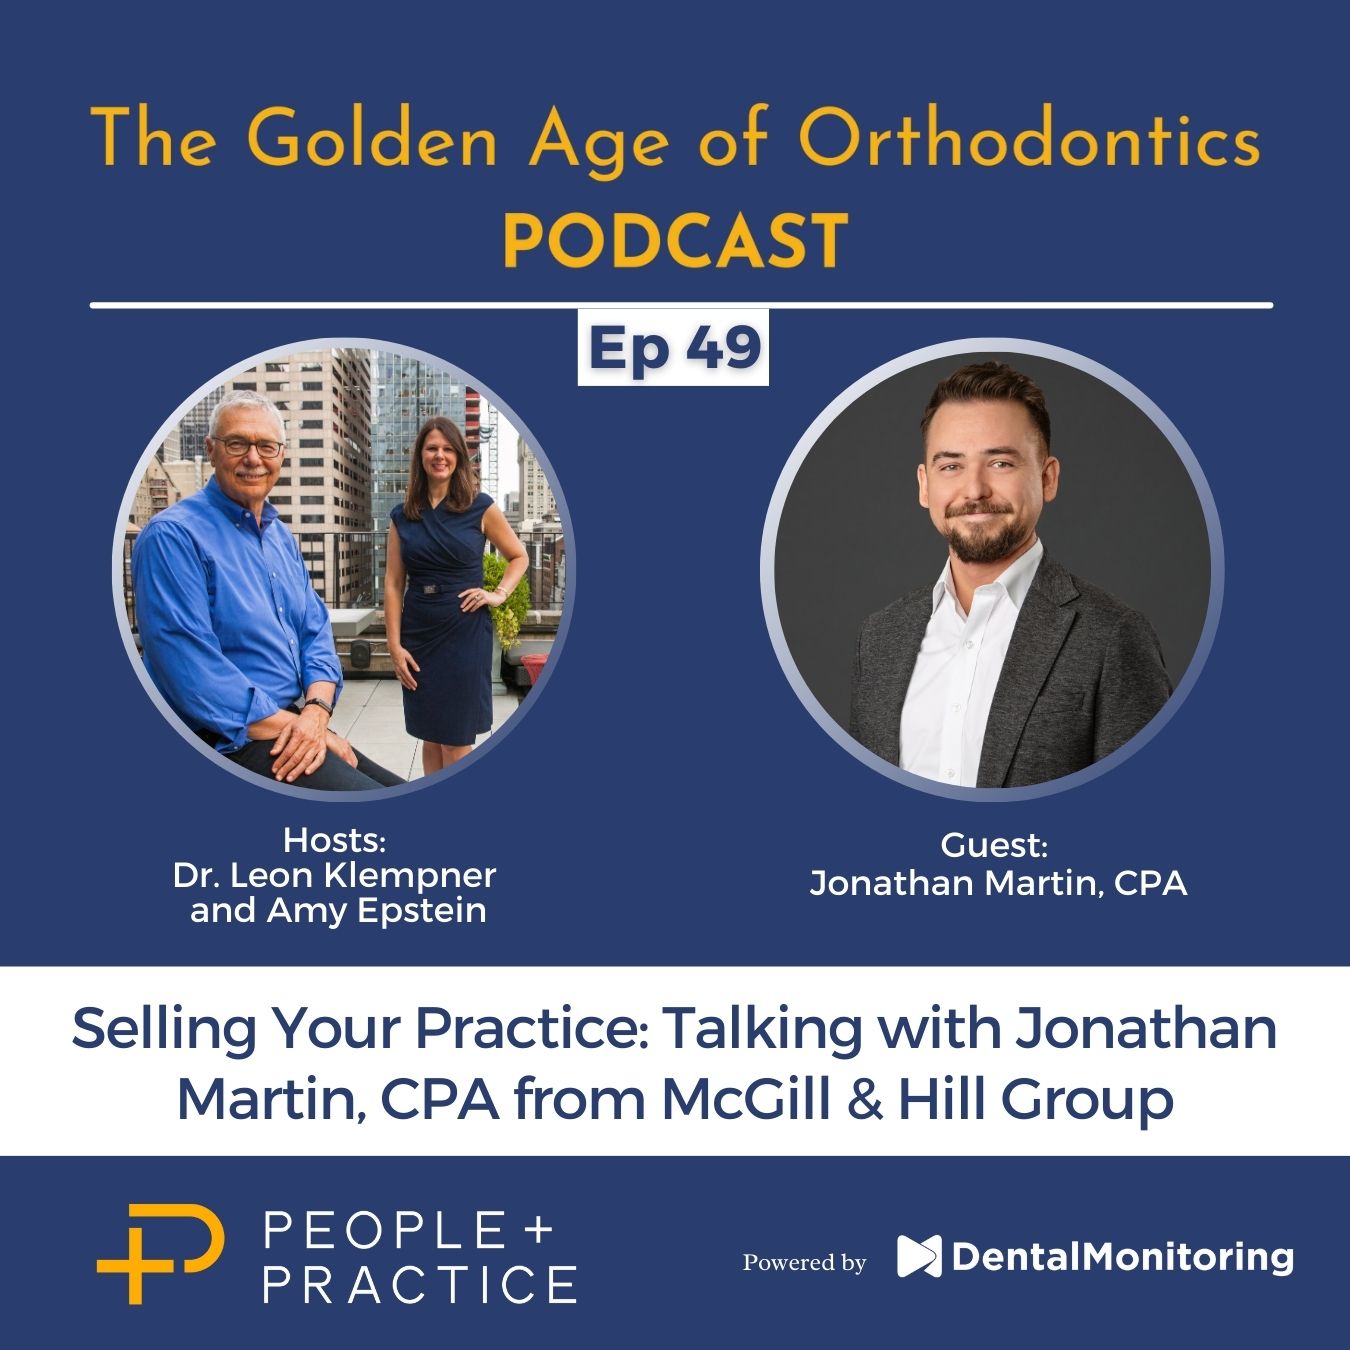 Selling Your Practice: Talking with Jonathan Martin, CPA from McGill & Hill Group